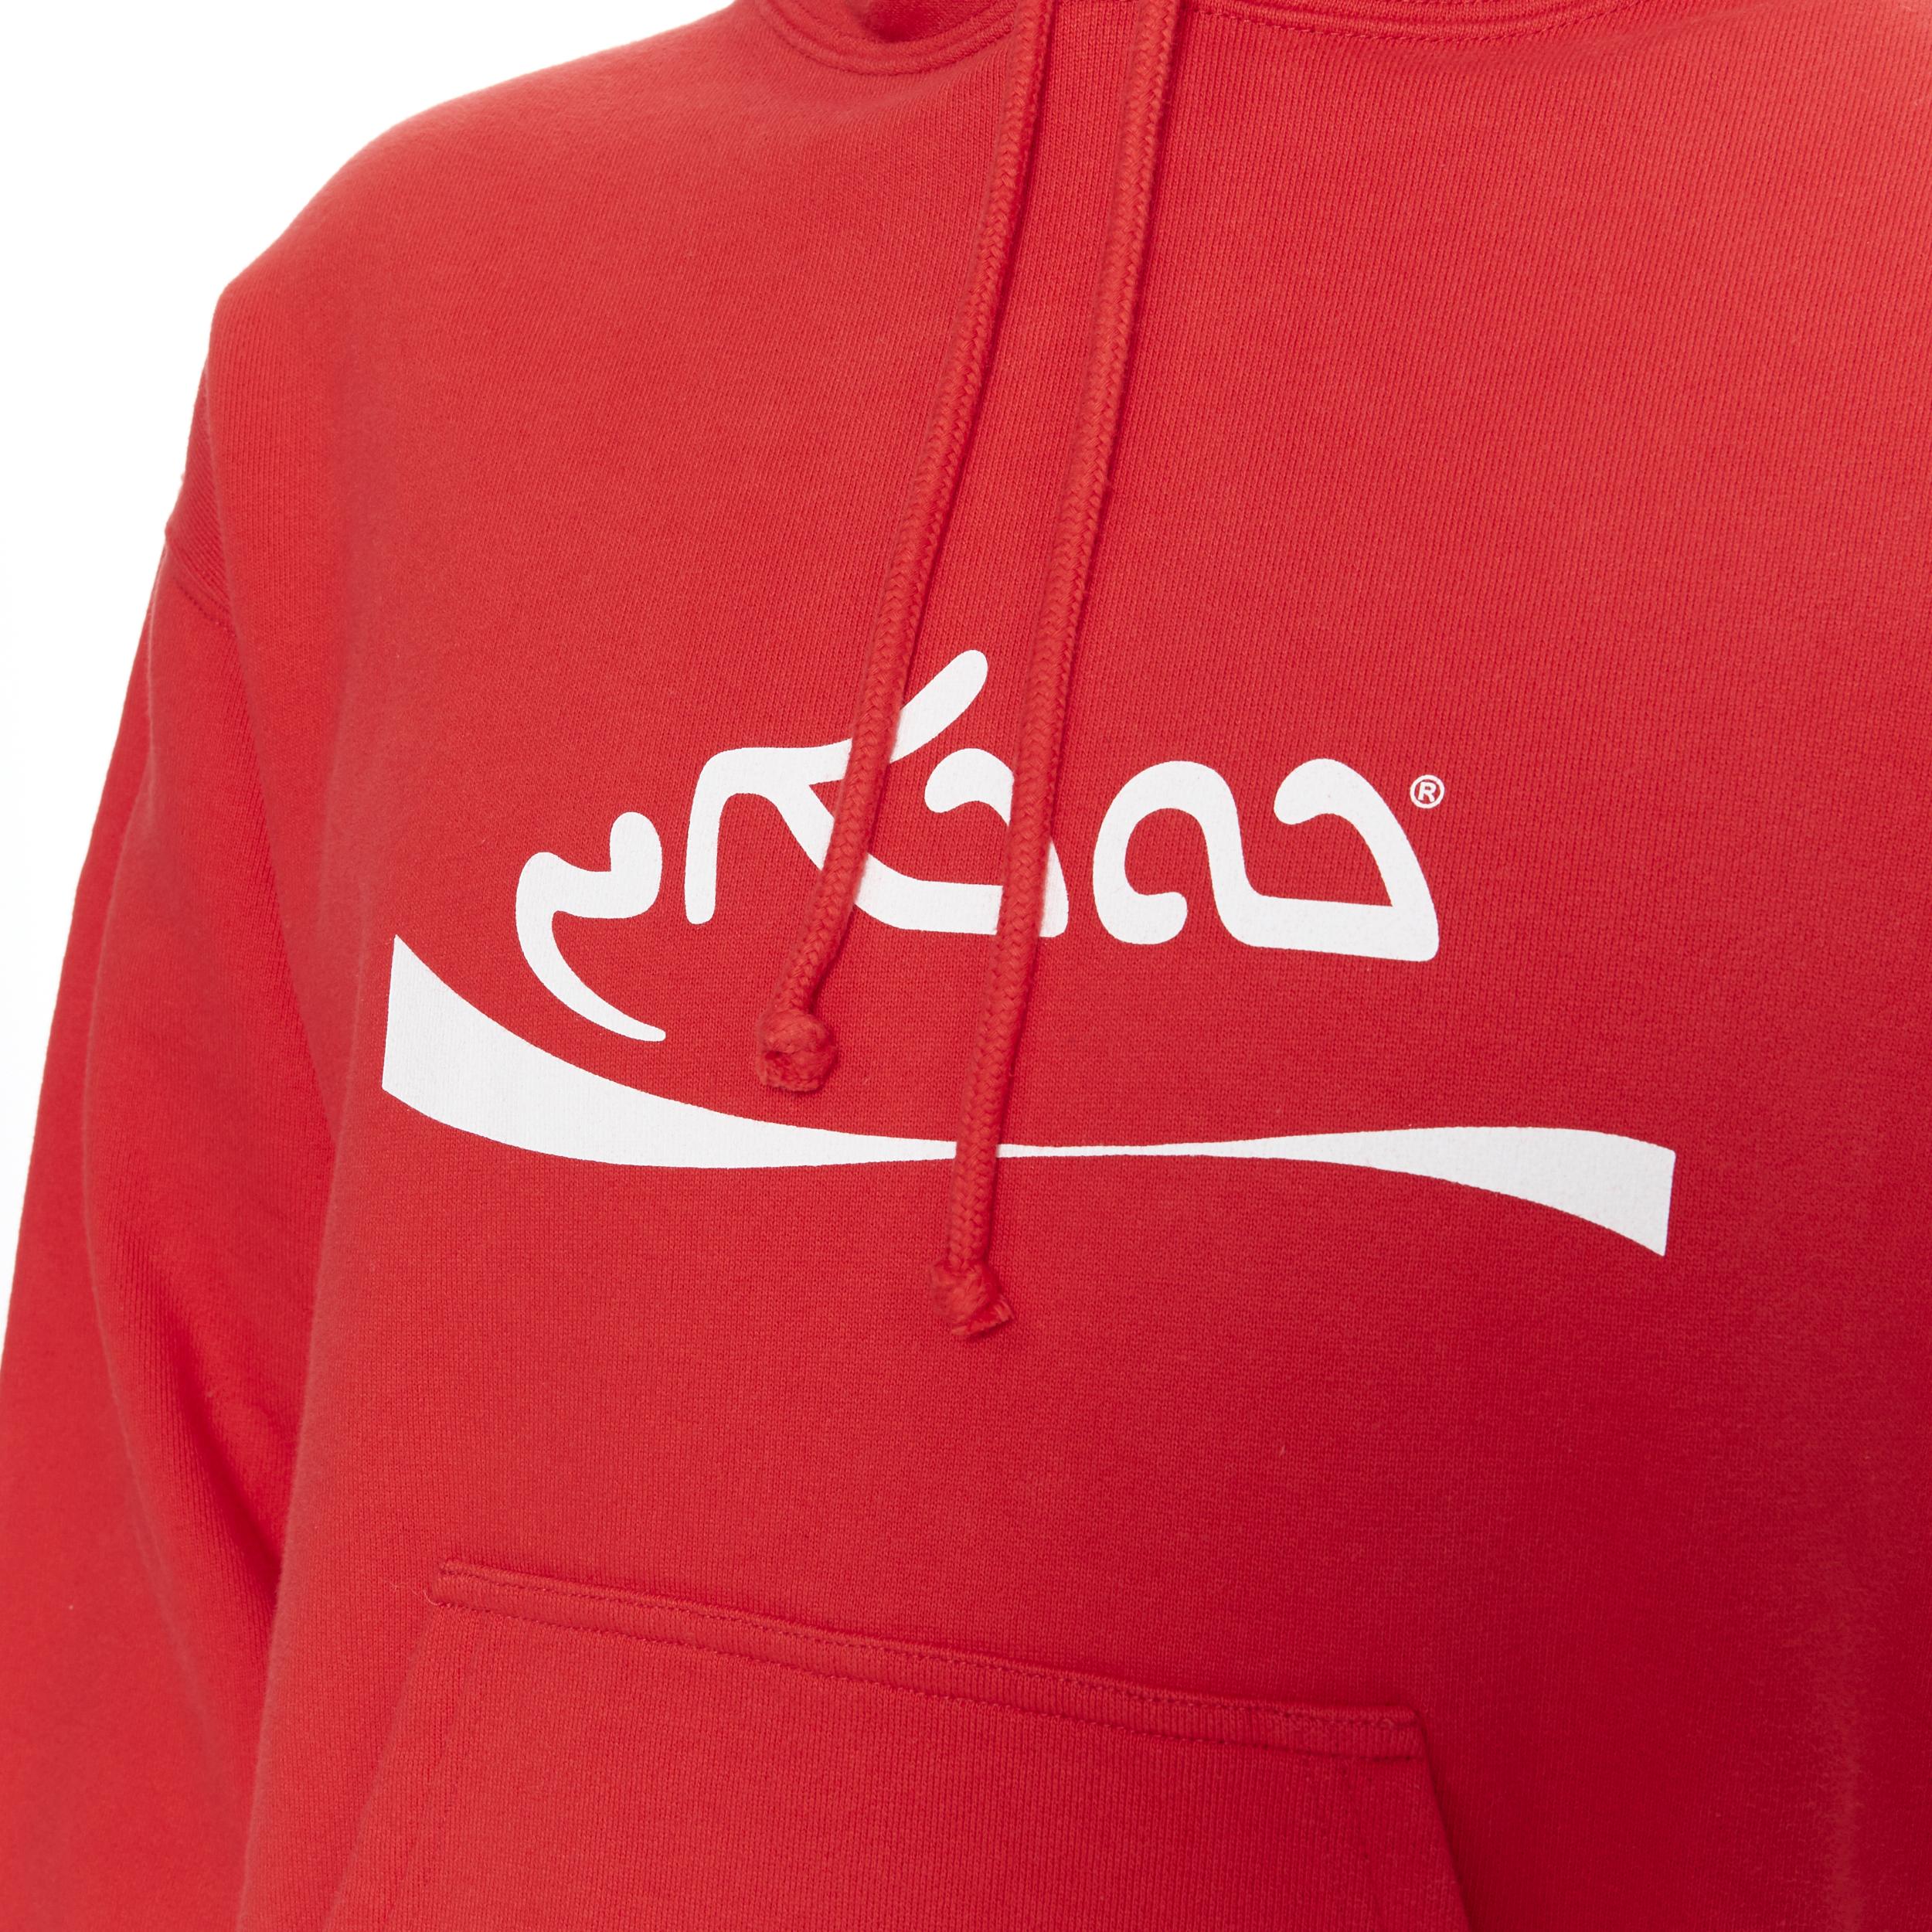 new VETEMENTS AW20 Big Cocaine red arabic Coke logo cropped hoodie sweater L
Brand: Vetements
Collection: AW2020
Model Name / Style: Cropped hoodie
Material: Cotton
Color: Red
Pattern: Solid
Extra Detail: Cropped fit. Long Sleeve.
Made in: